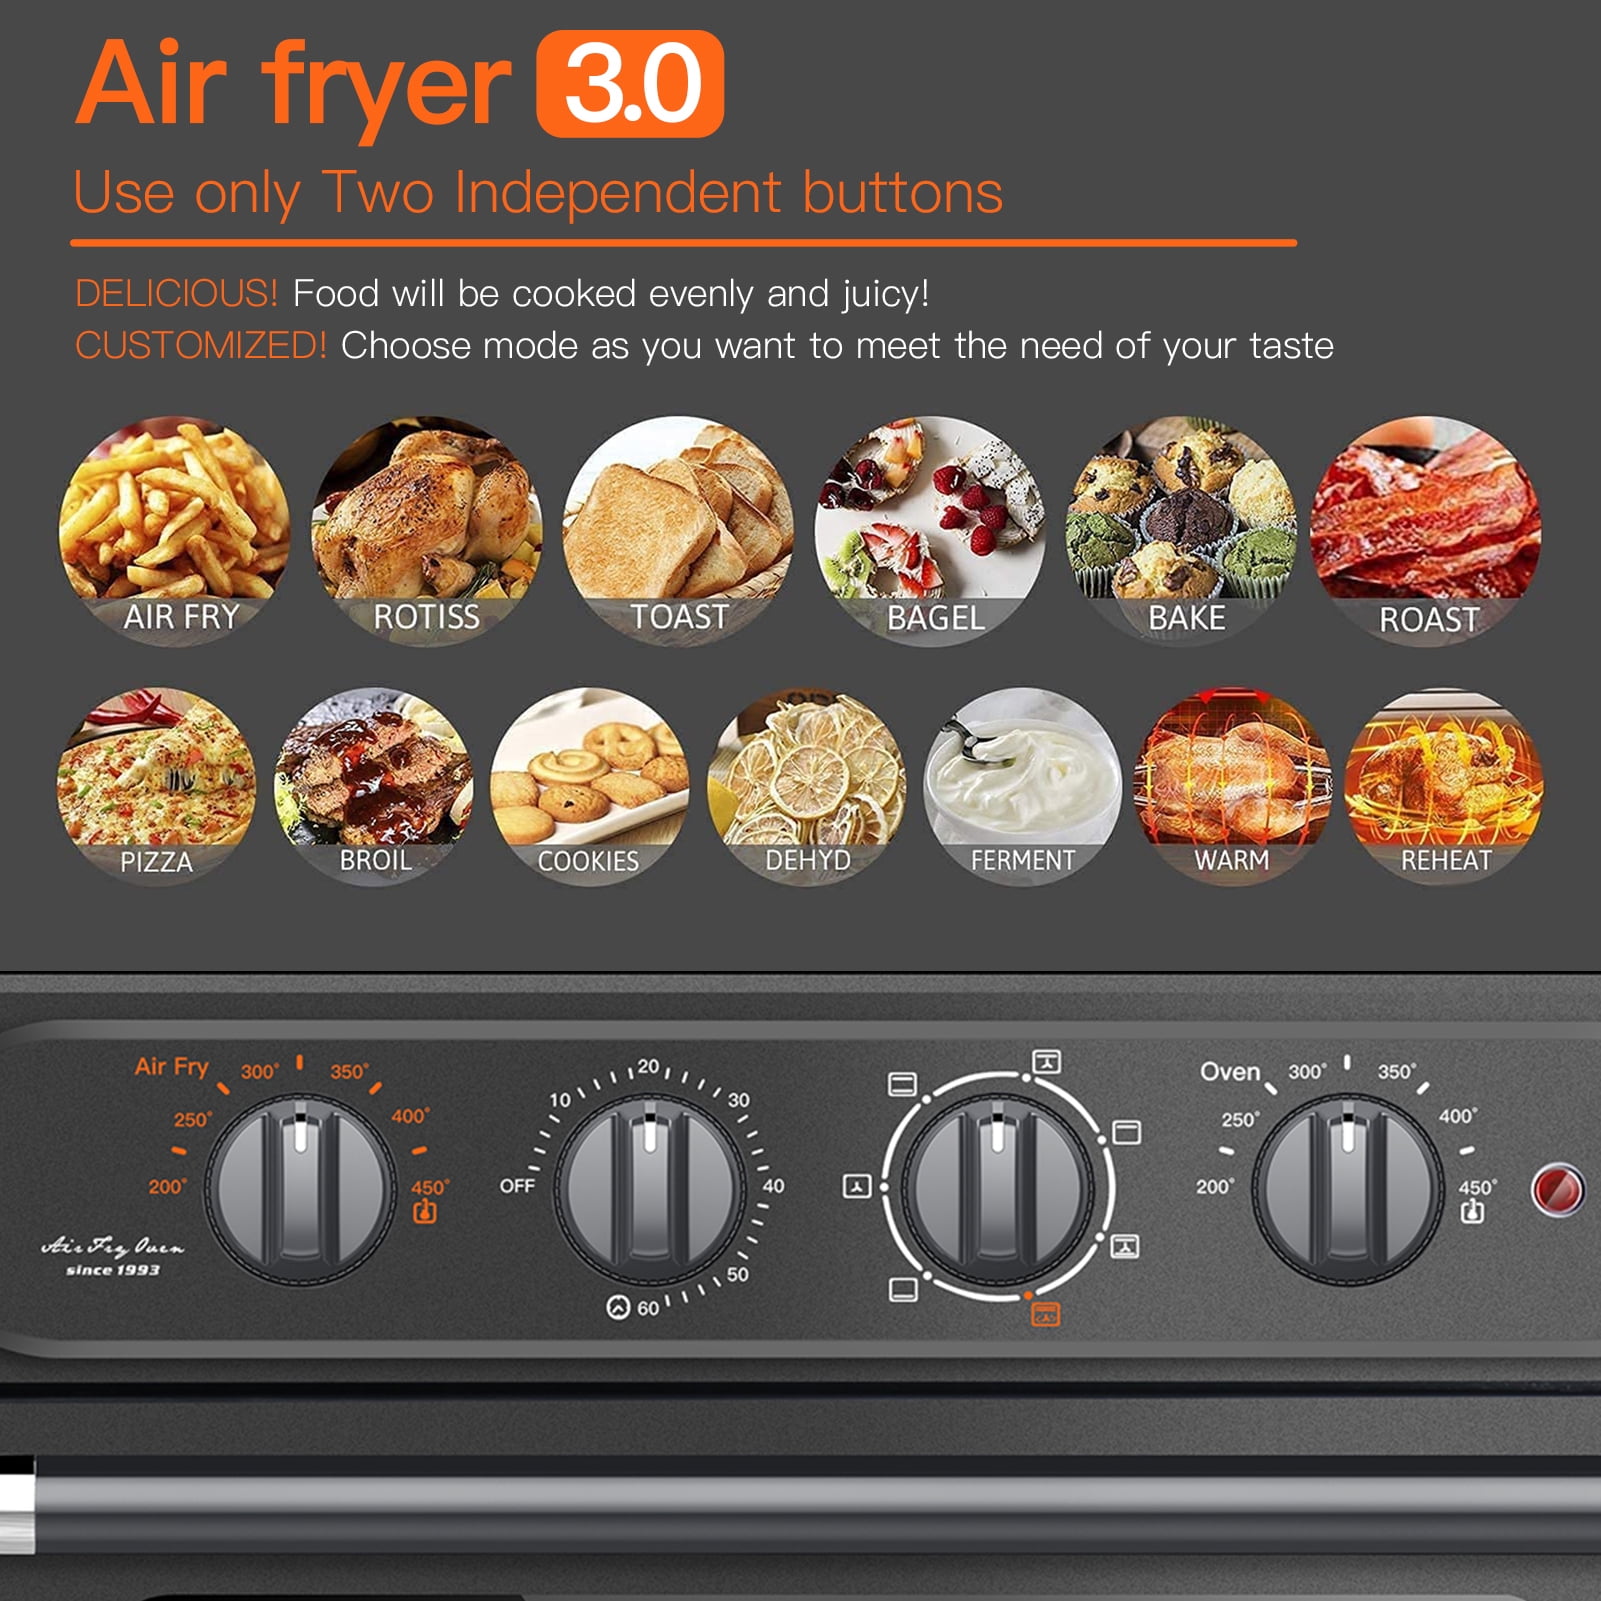 FOHERE Air Fryer Toaster Oven Combo, 20QT Smart Convection Ovens  Countertop, 7 Cooking Functions for Roast, Bake, Broil, Air Fry, Free  Accessories